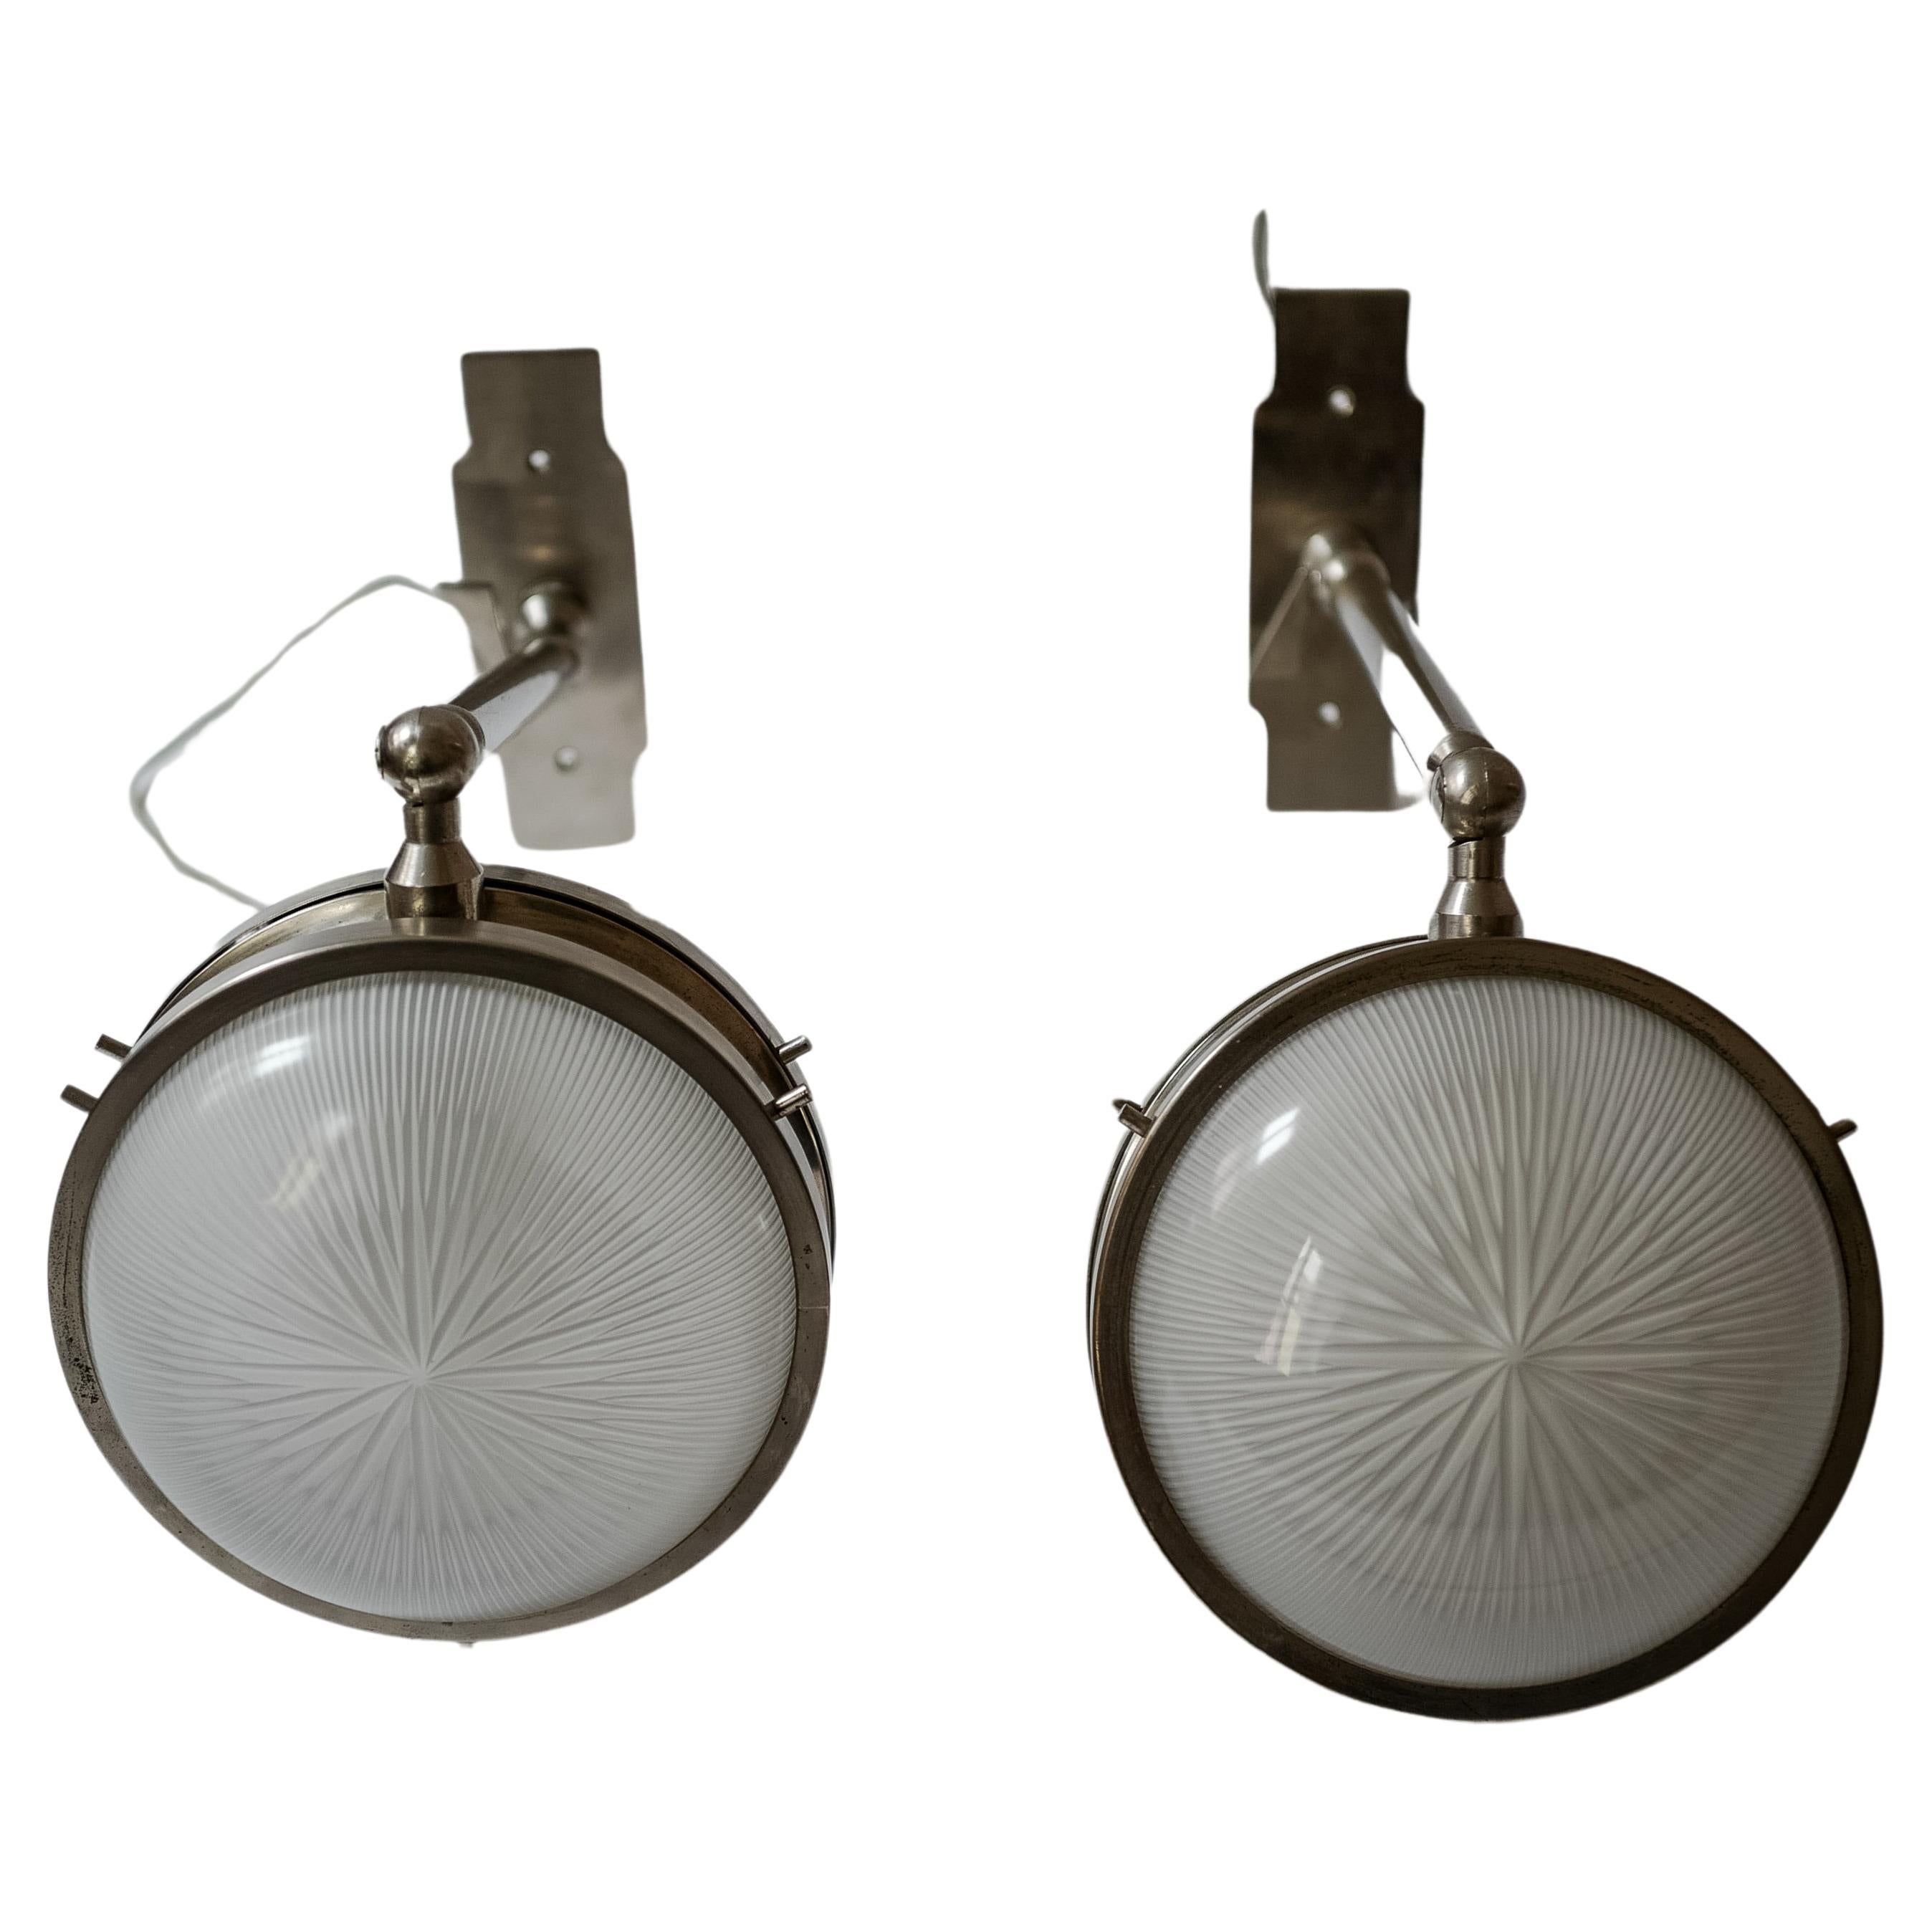 Sergio Mazza "Gamma" Sconces wall lights Artemide, nickel plated brass pair 1970 For Sale